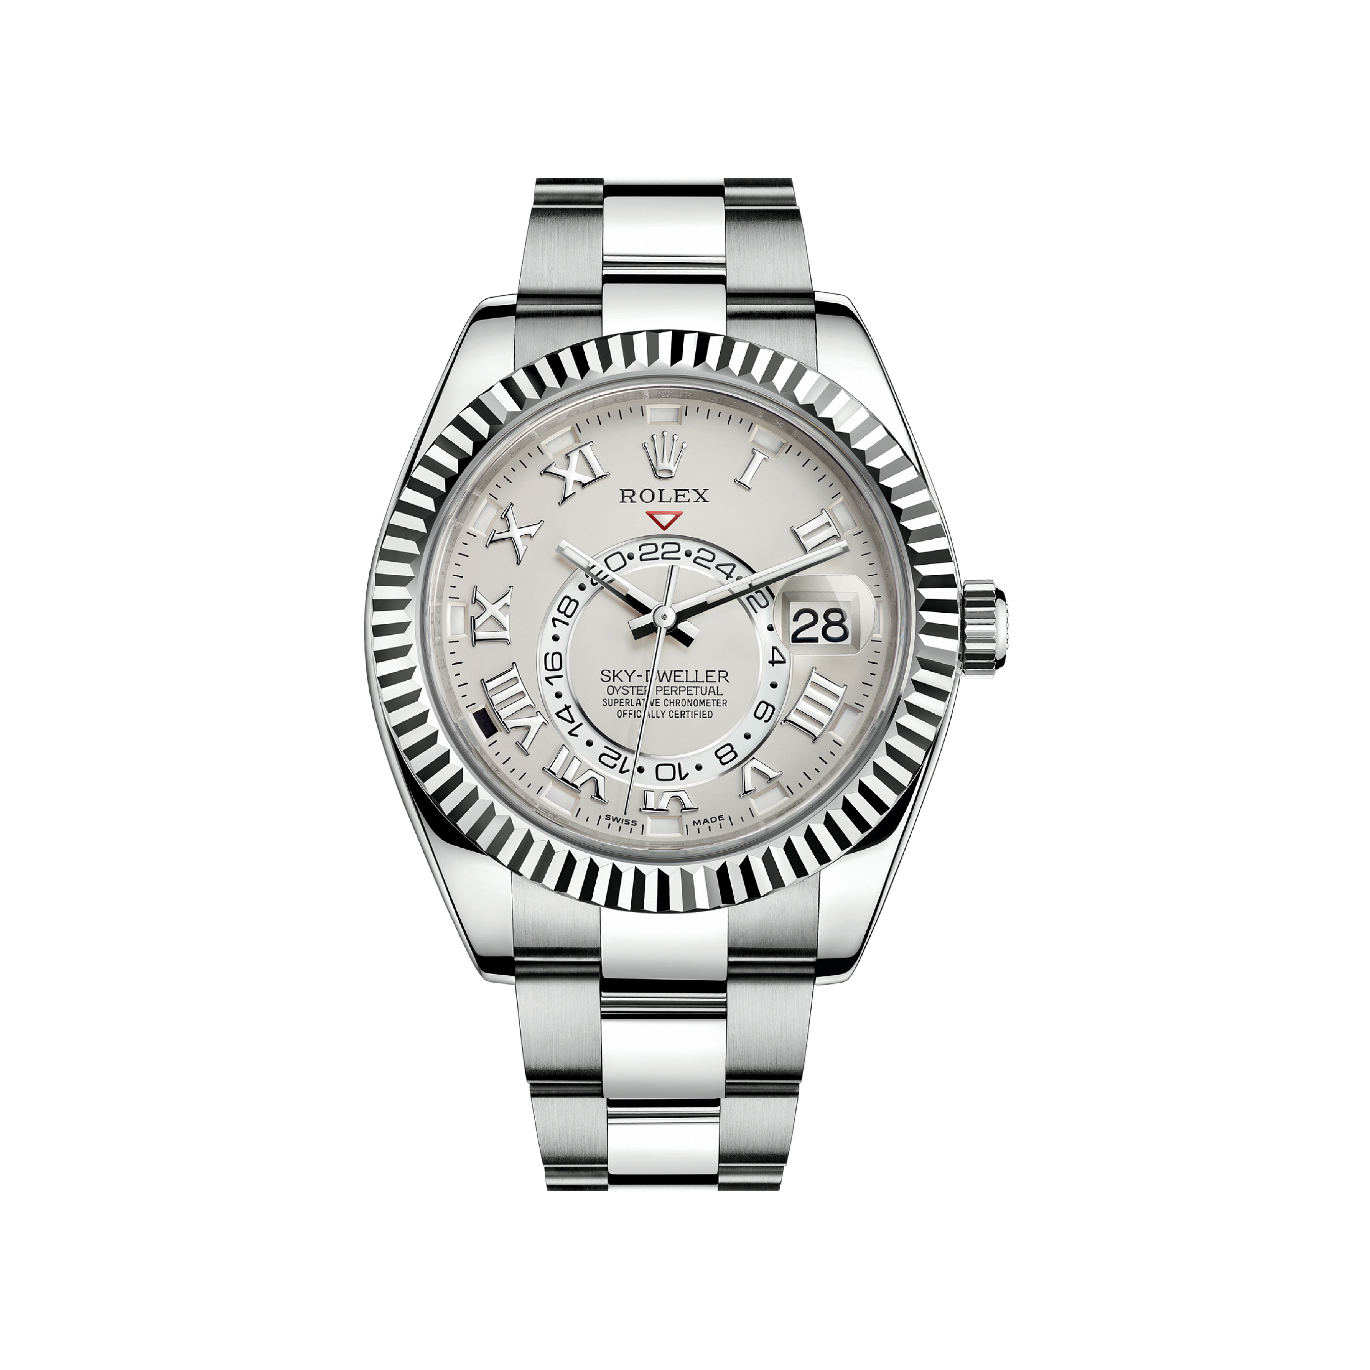 Sky-Dweller 326939 White Gold Watch (Ivory-Colored)